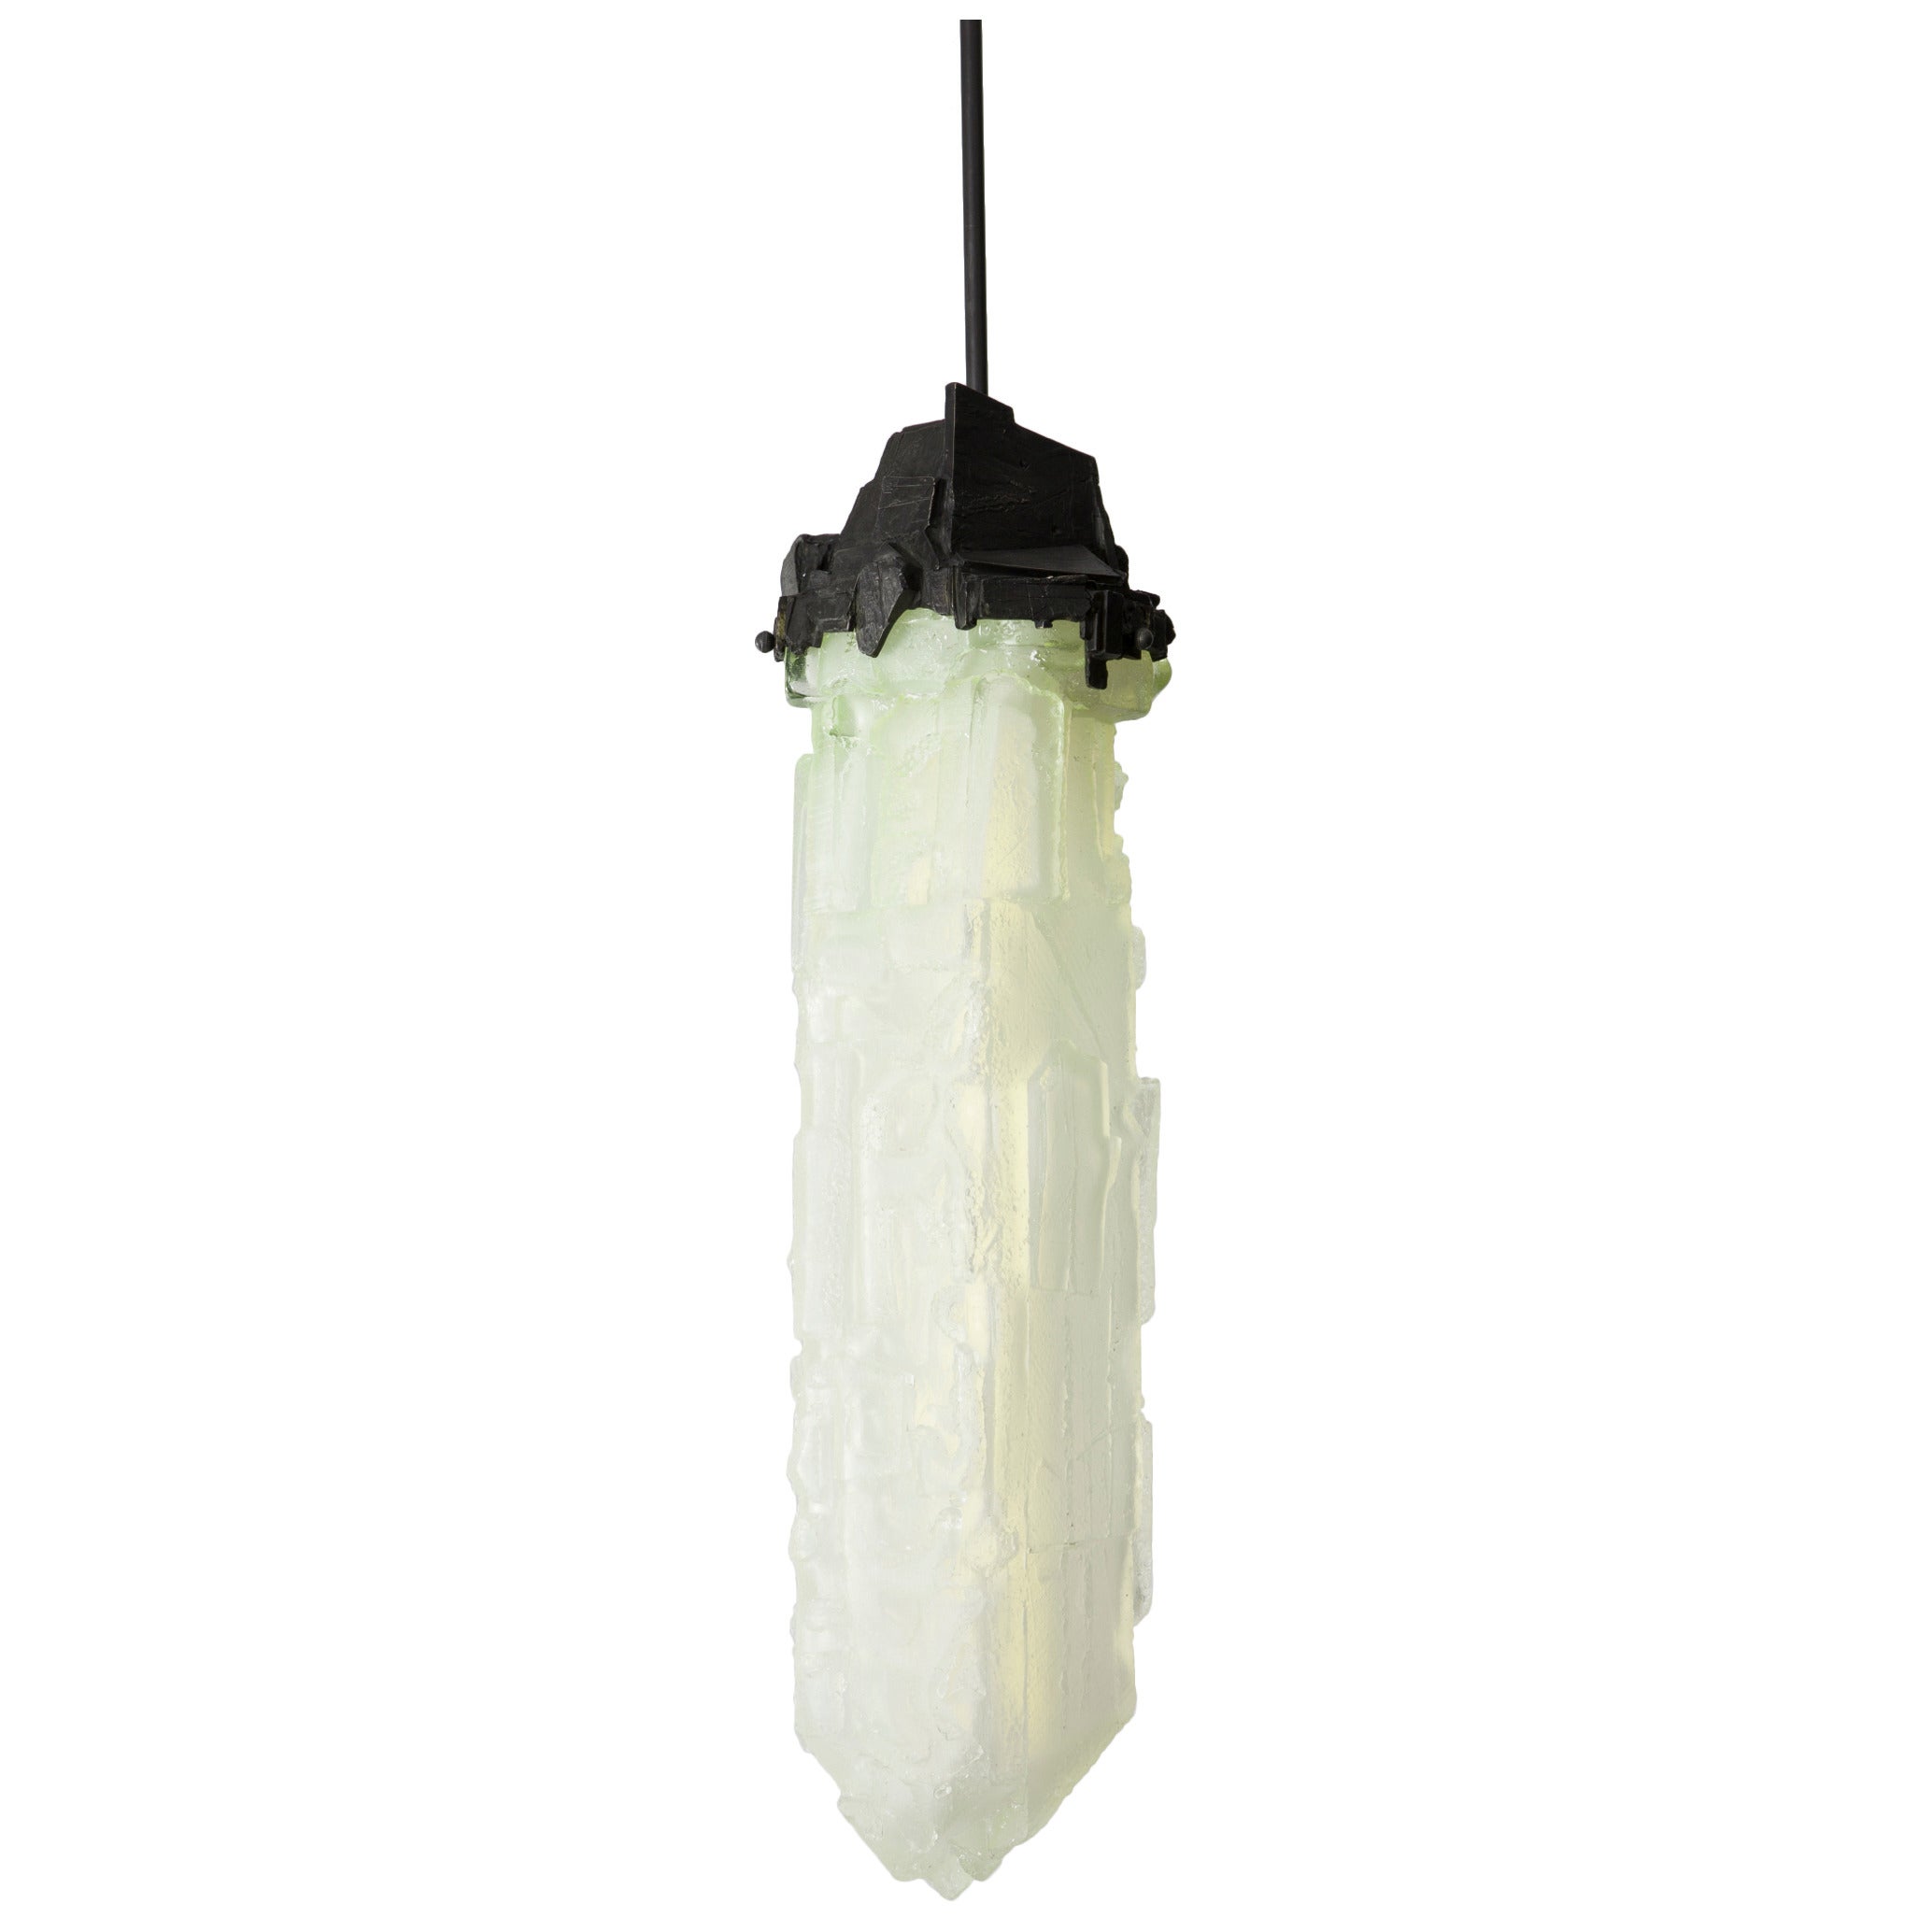 Unique Assemblage Pendant Lamp in Opaline Glass by Thaddeus Wolfe, 2014